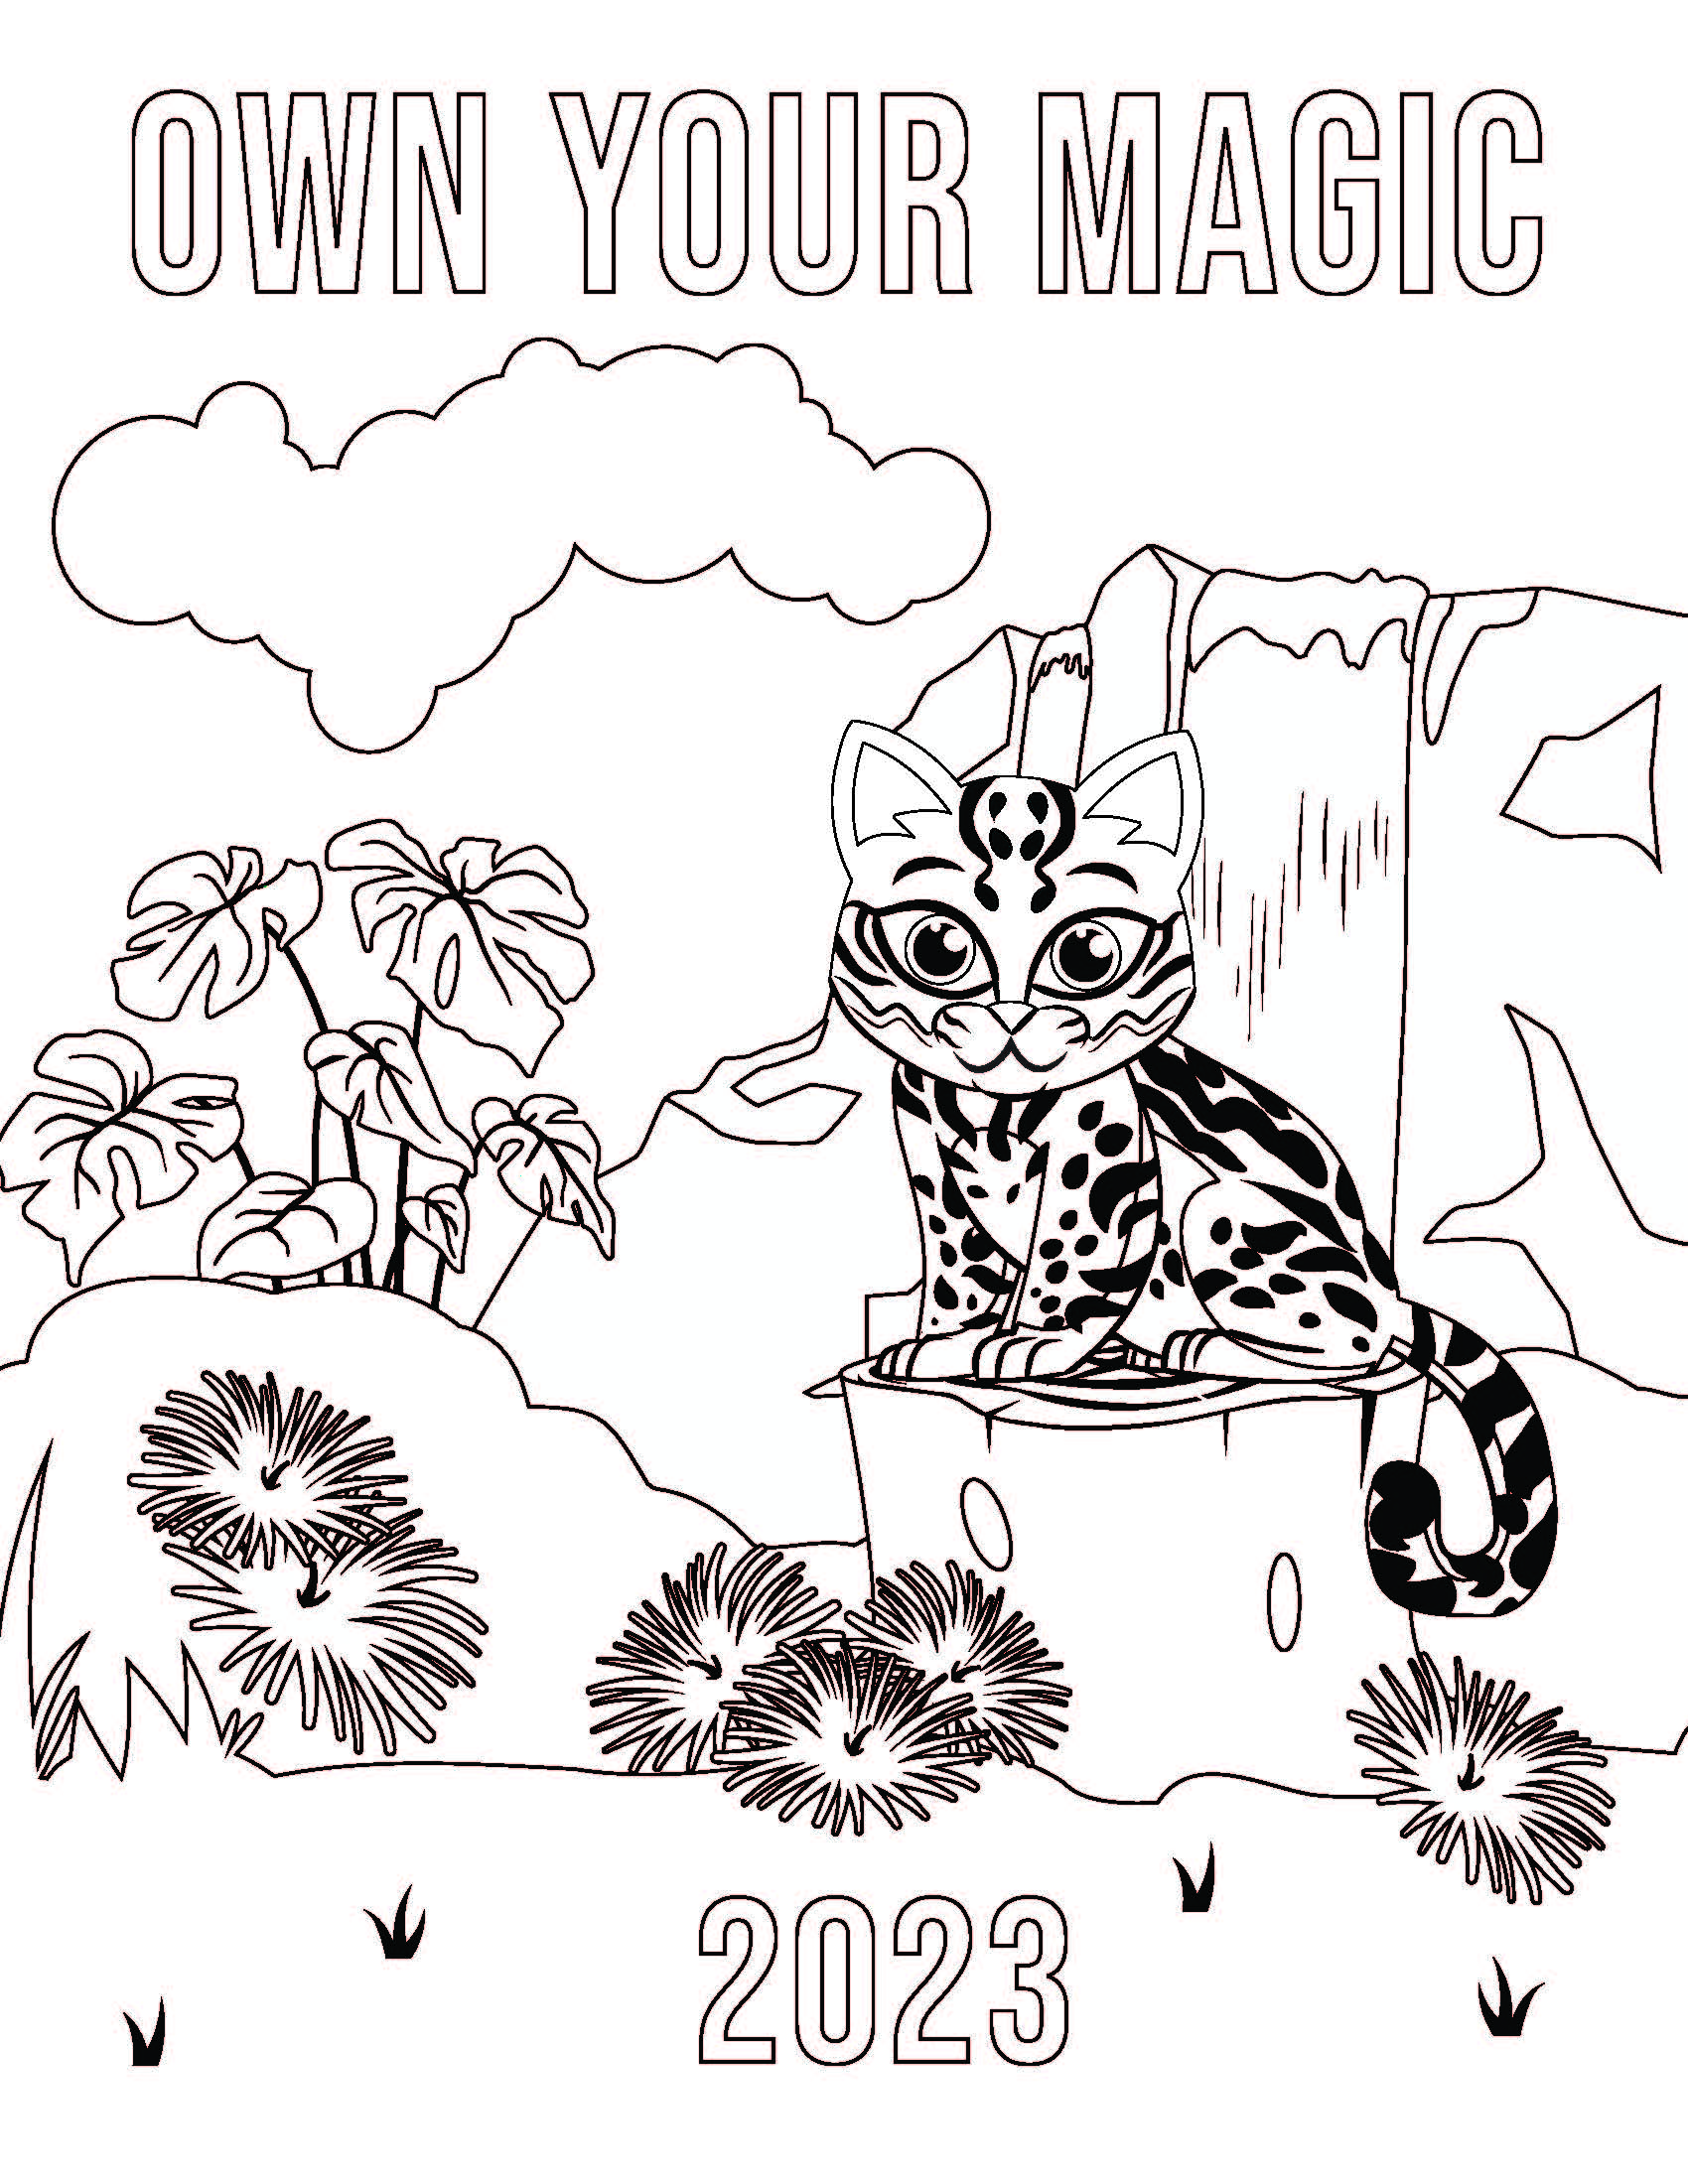 MagNut Coloring Page 1